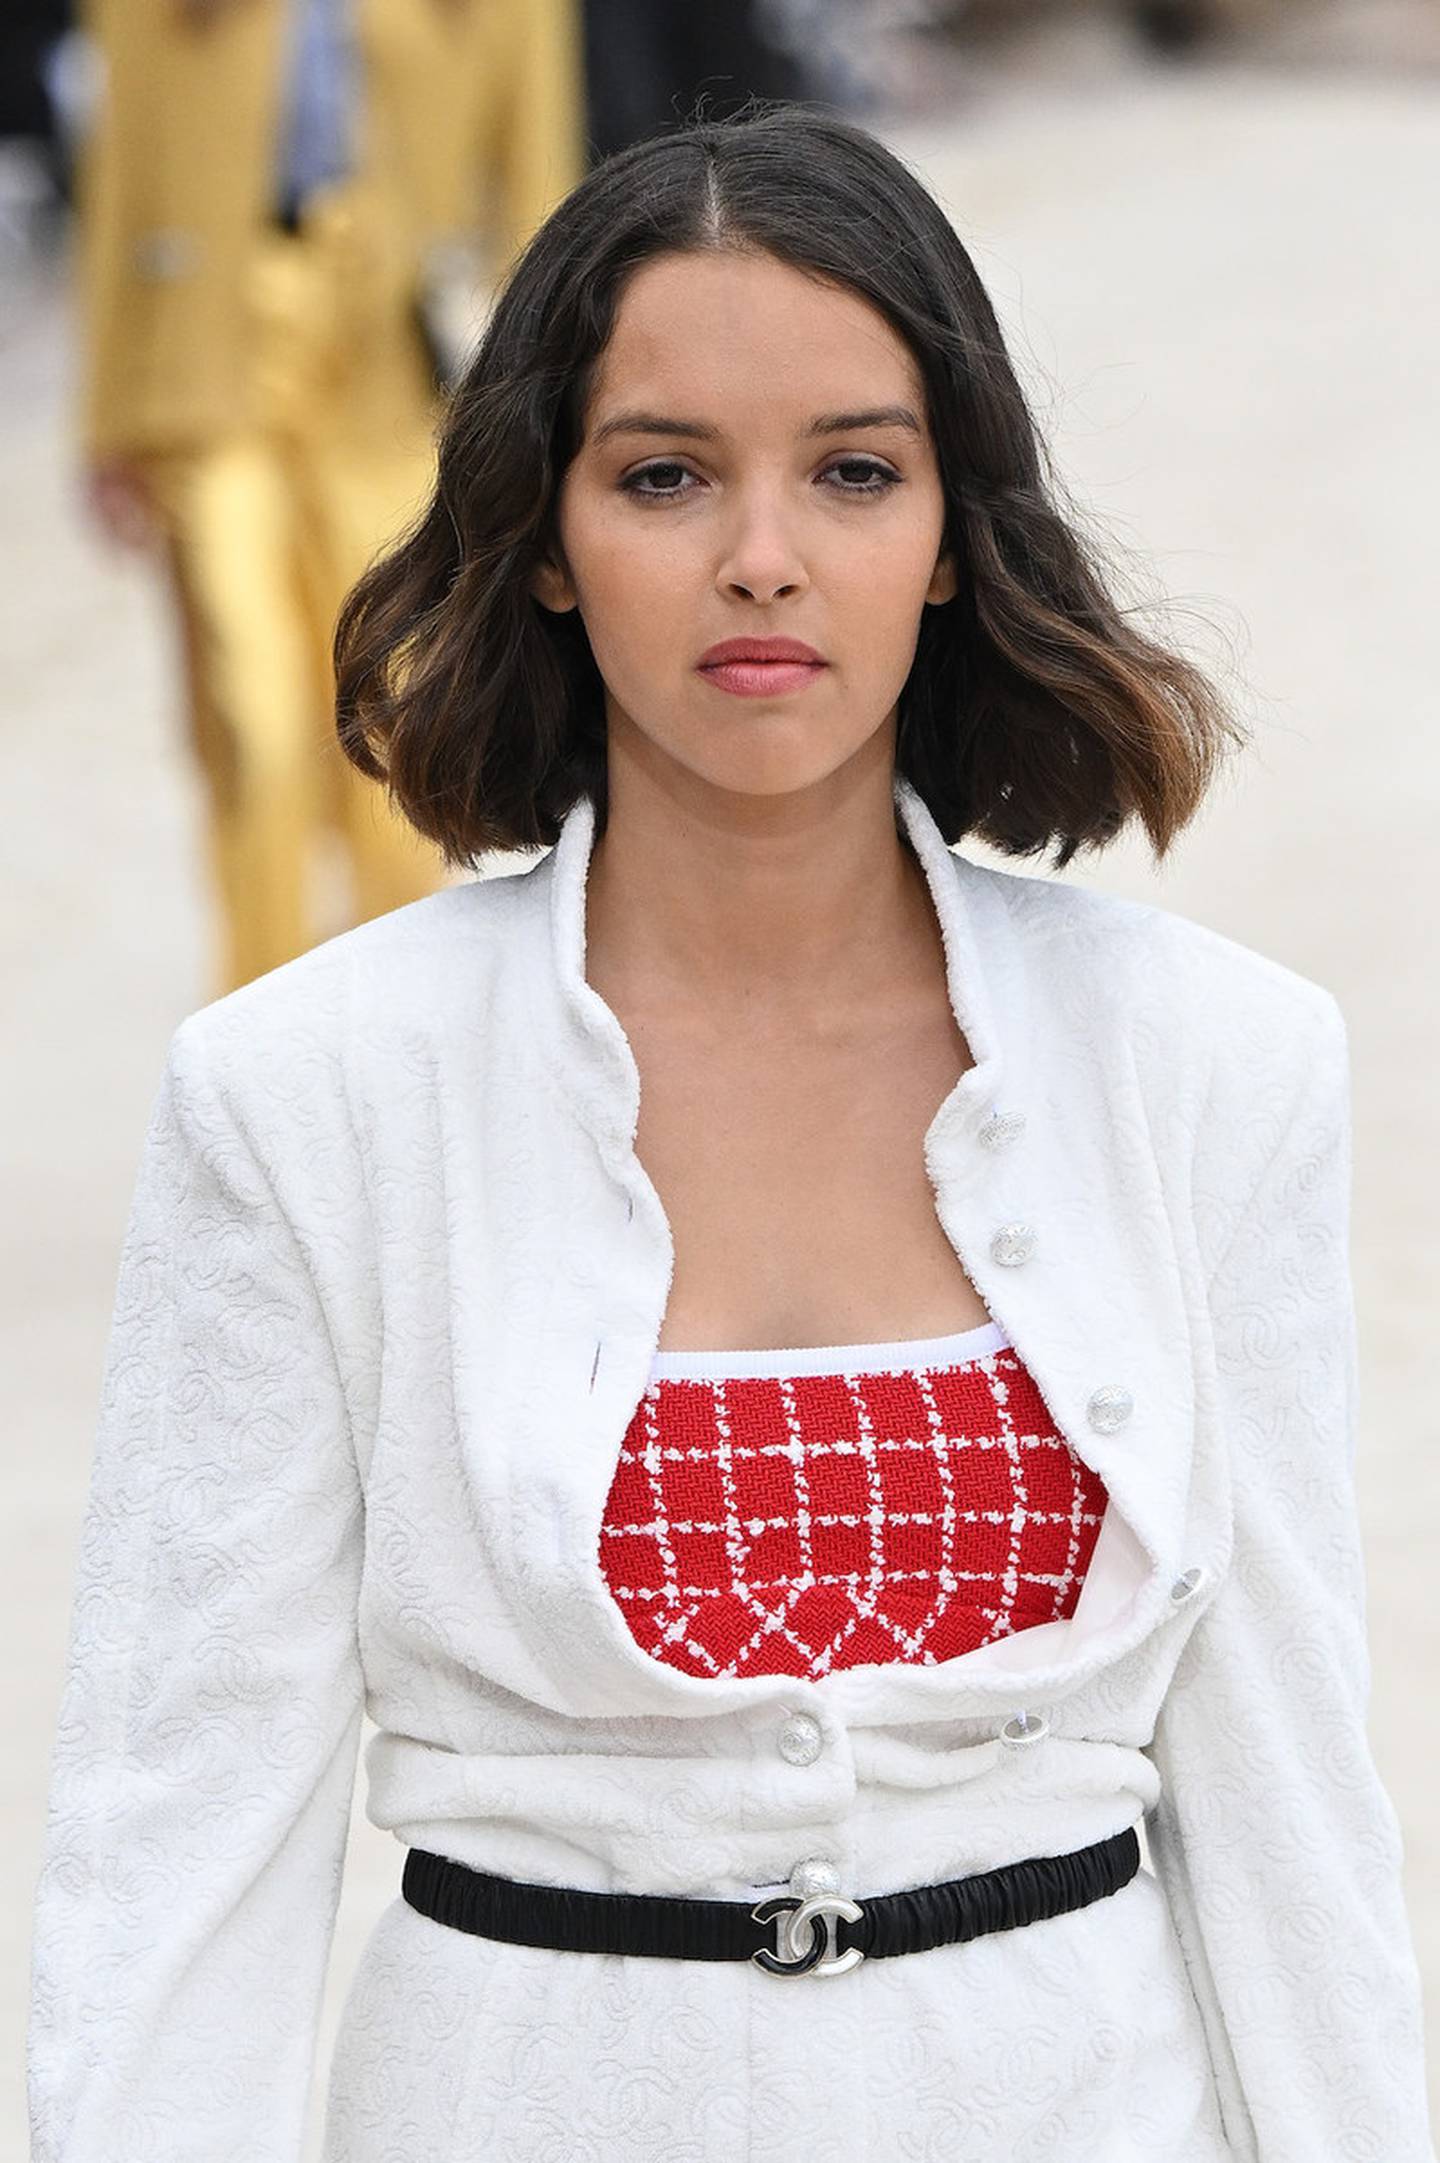 French-Algerian actress, and Chanel ambassador, Lyna Khoudri was also part of the show. Photo: Chanel